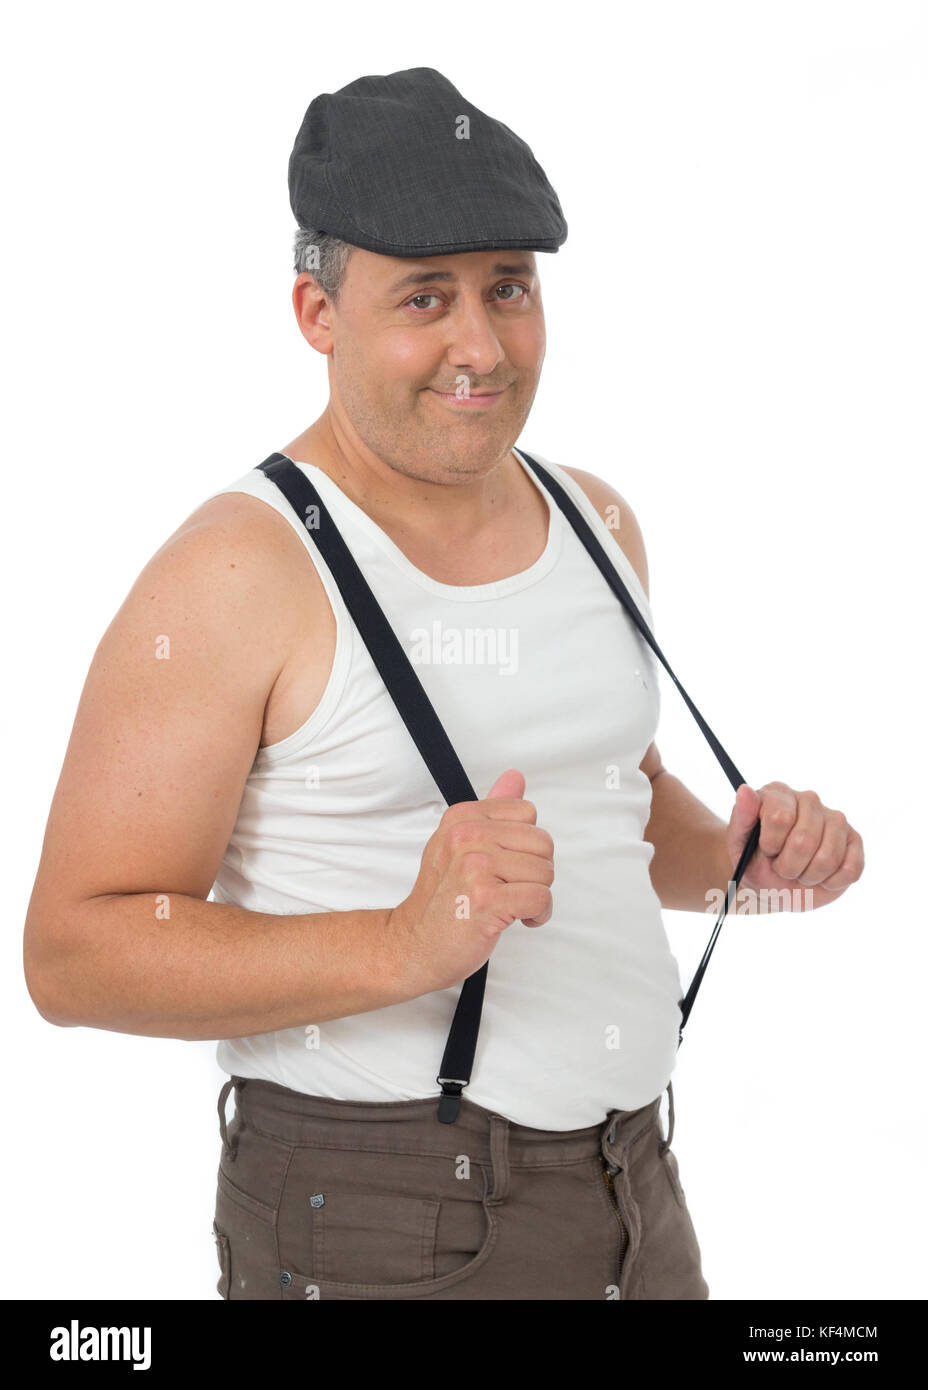 Fat man holds the pants suspender. He is smiling. Vintage and retro. Clothes of old. The old fashion. Isolated on white background. Stock Photo